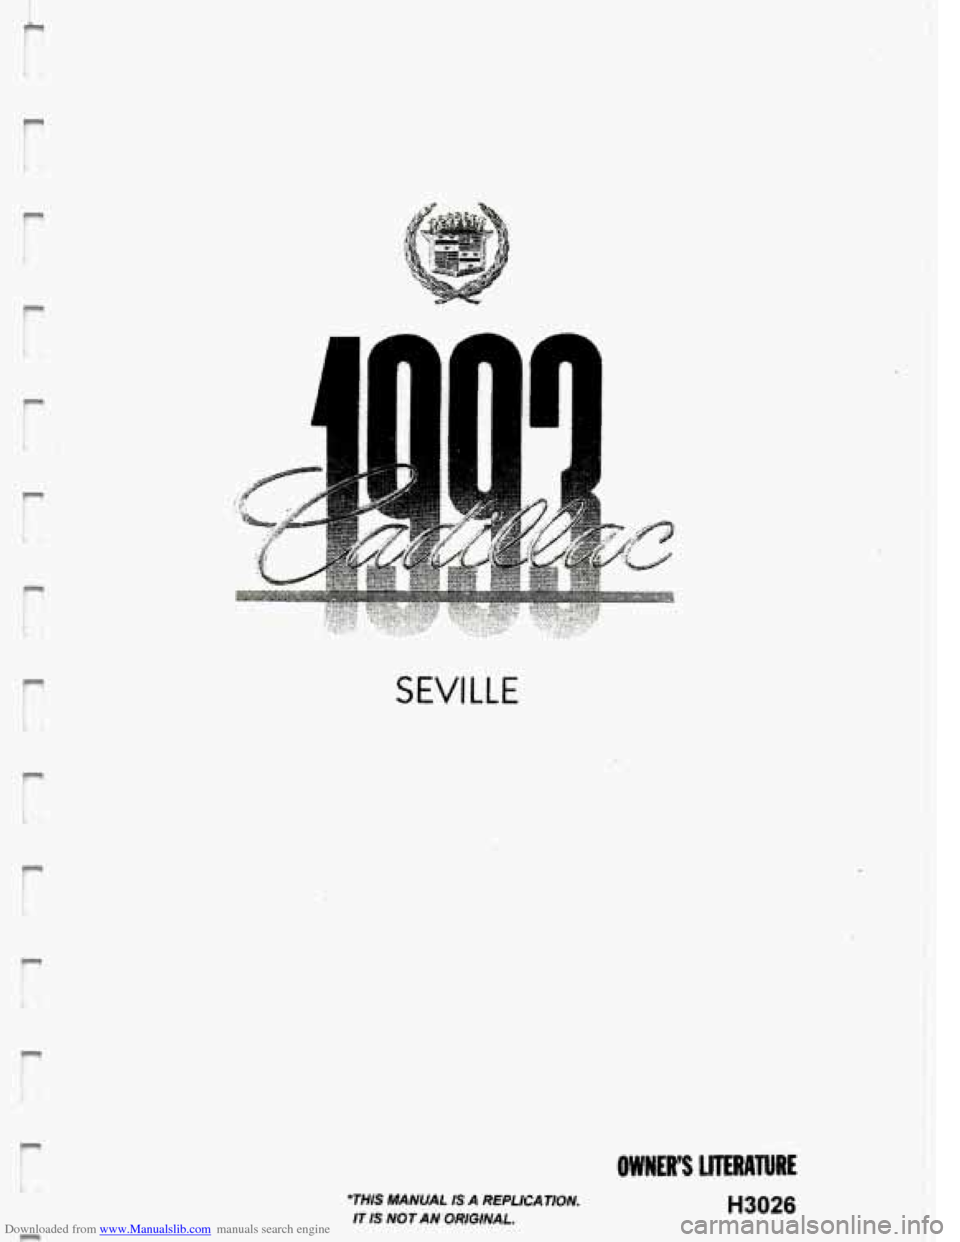 CADILLAC SEVILLE 1993 4.G Owners Manual Downloaded from www.Manualslib.com manuals search engine 1 1. 
n 
SEVILLE 
THIS MANUAL IS A REPLICATION. 
IT IS NOT  AN ORIGINAL. 
OWWES LITERATURE 
H3026   